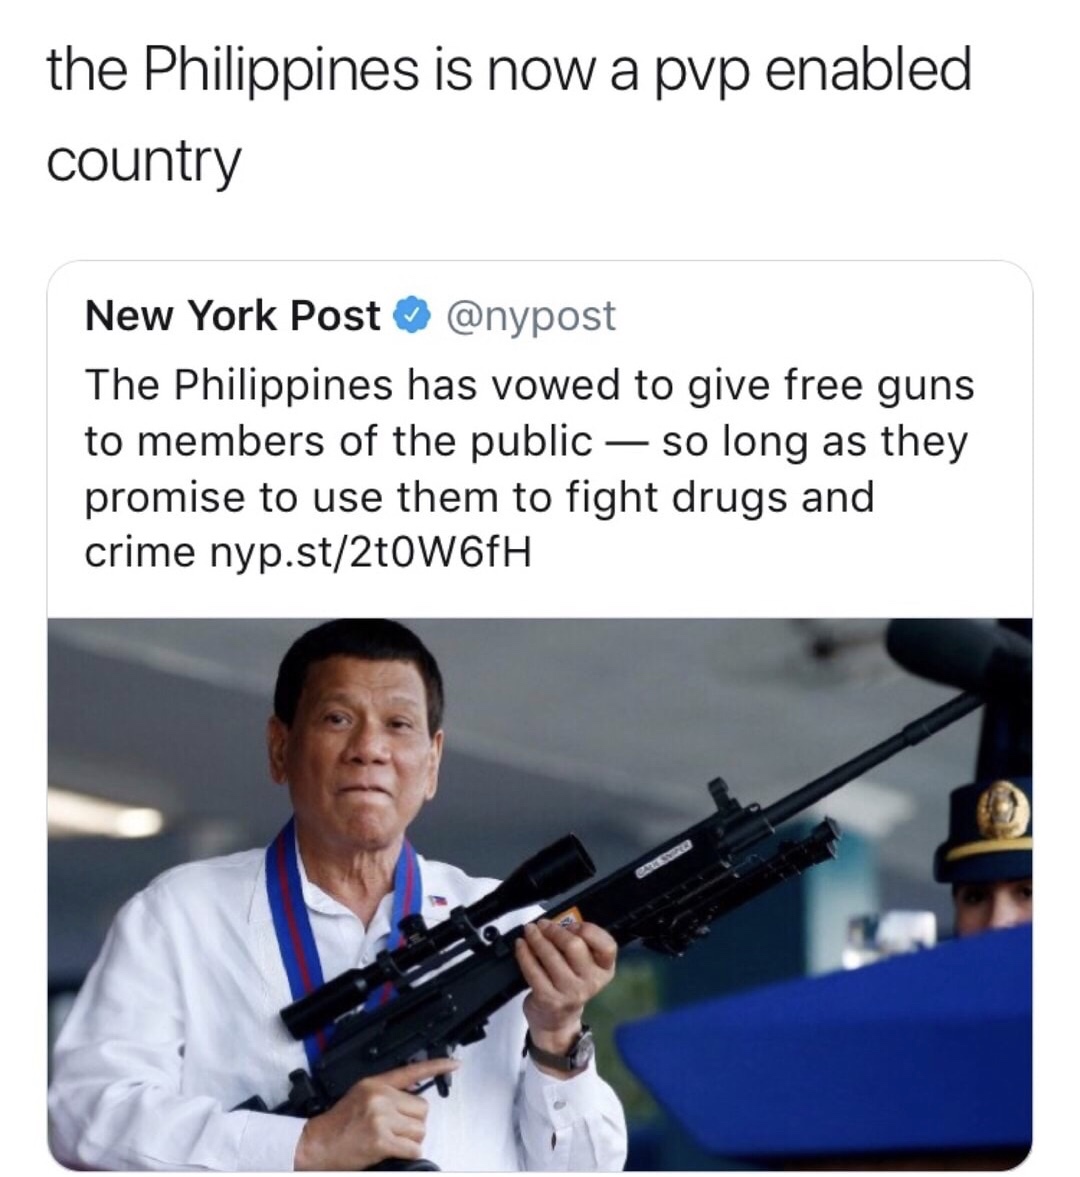 Duterte meme about giving automatic rifles to citizens in Philippines